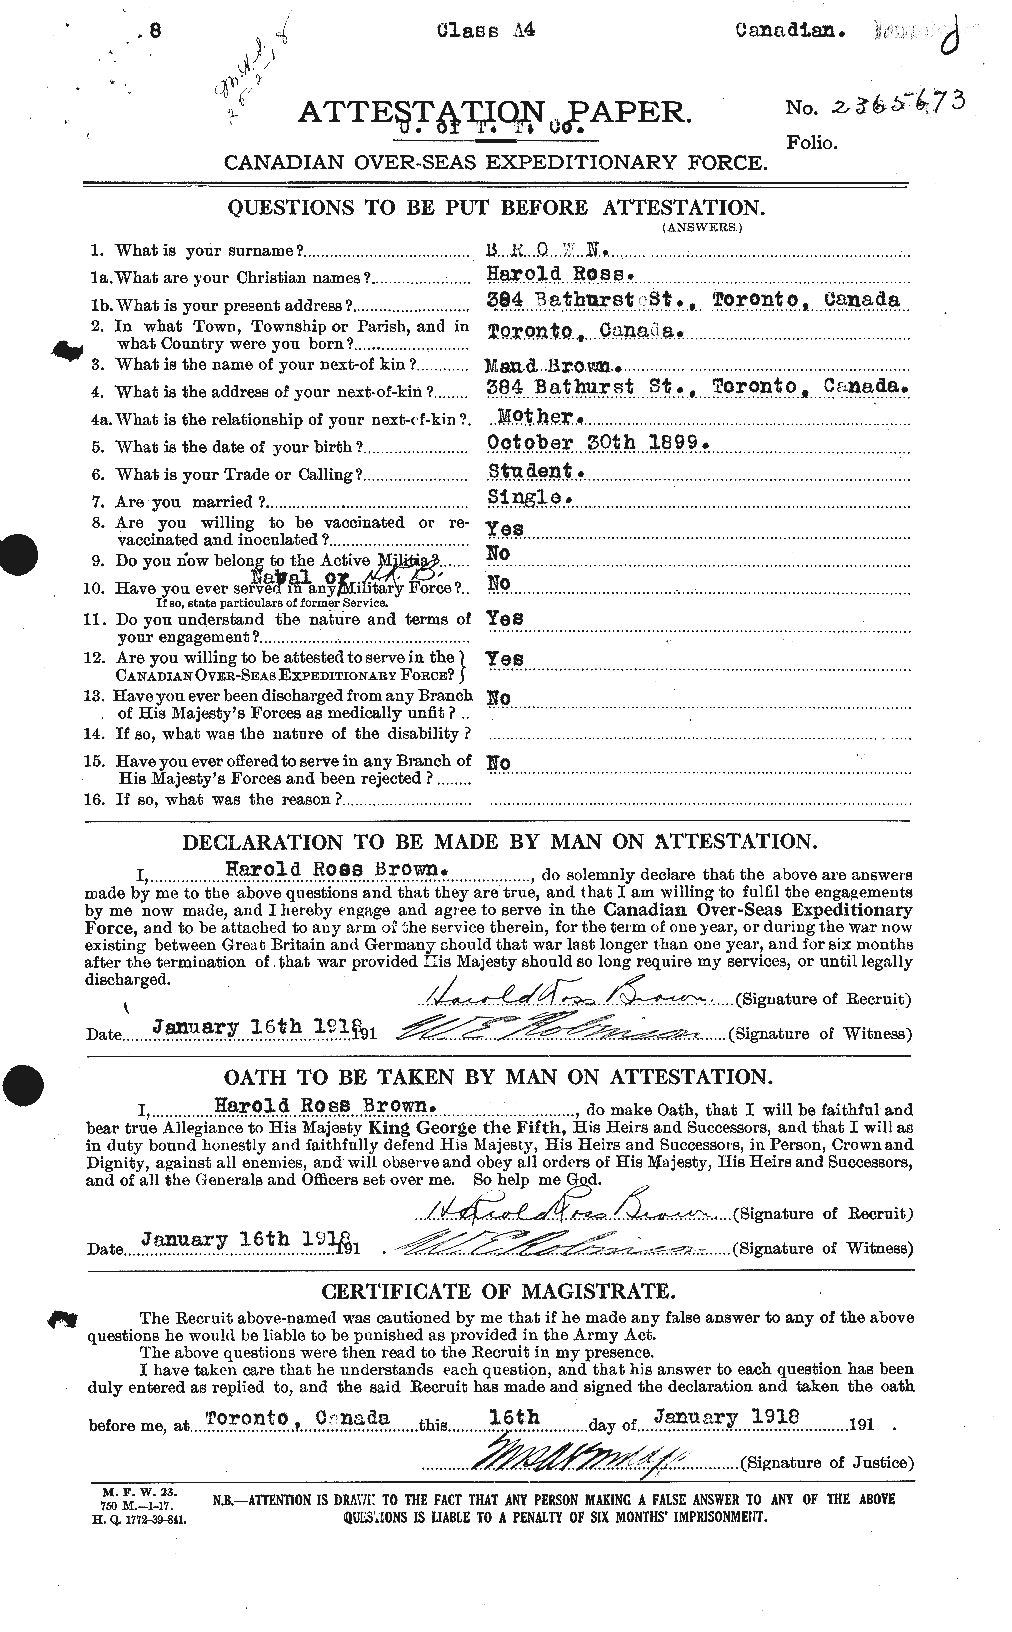 Personnel Records of the First World War - CEF 265372a